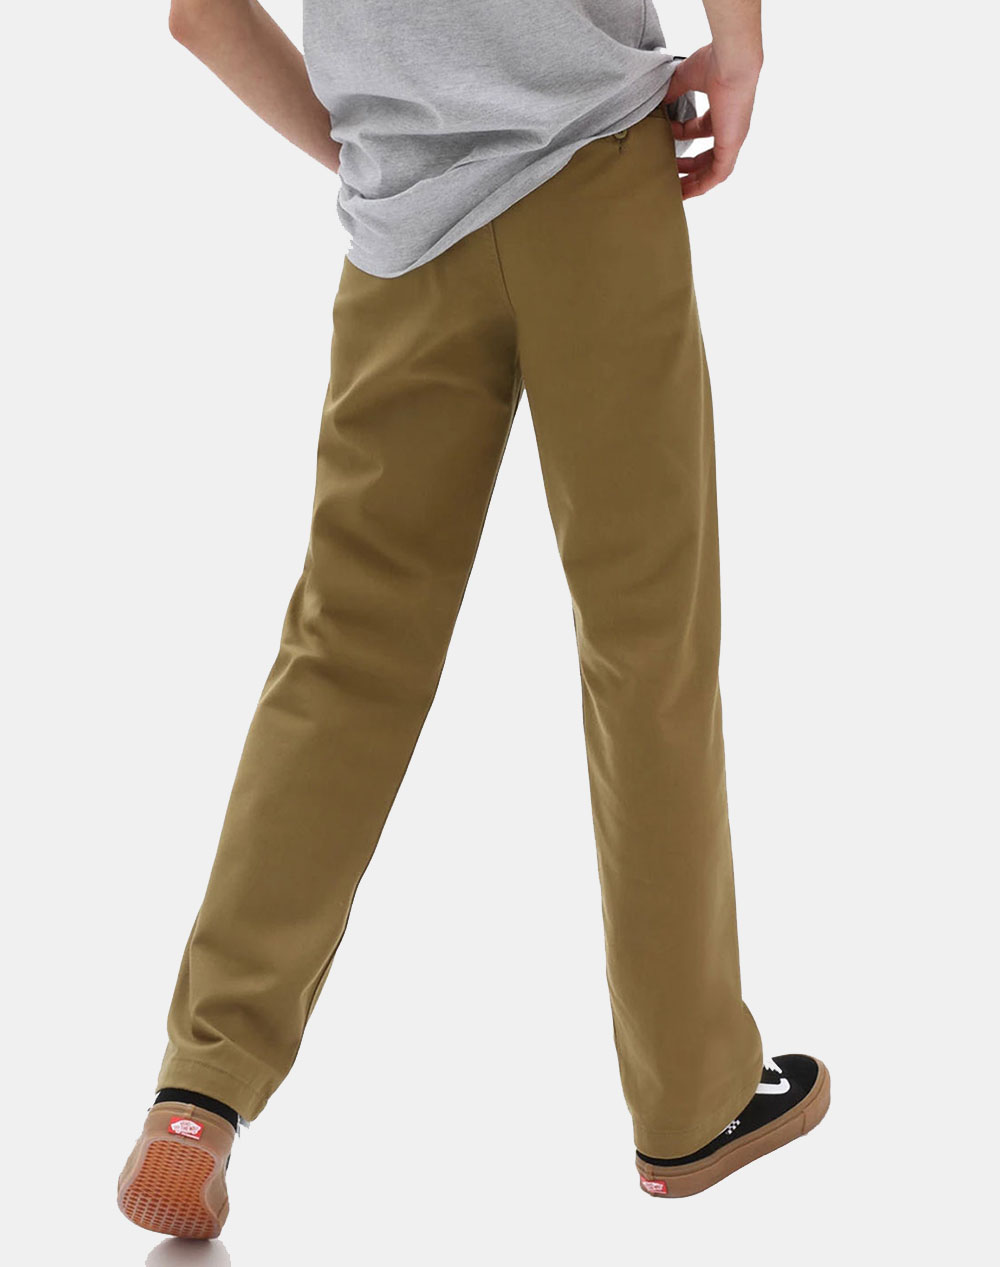 Vans AUTHENTIC CHINO SLIM PANT Beige  Fast delivery  Spartoo Europe    Clothing chinos Men 6160 